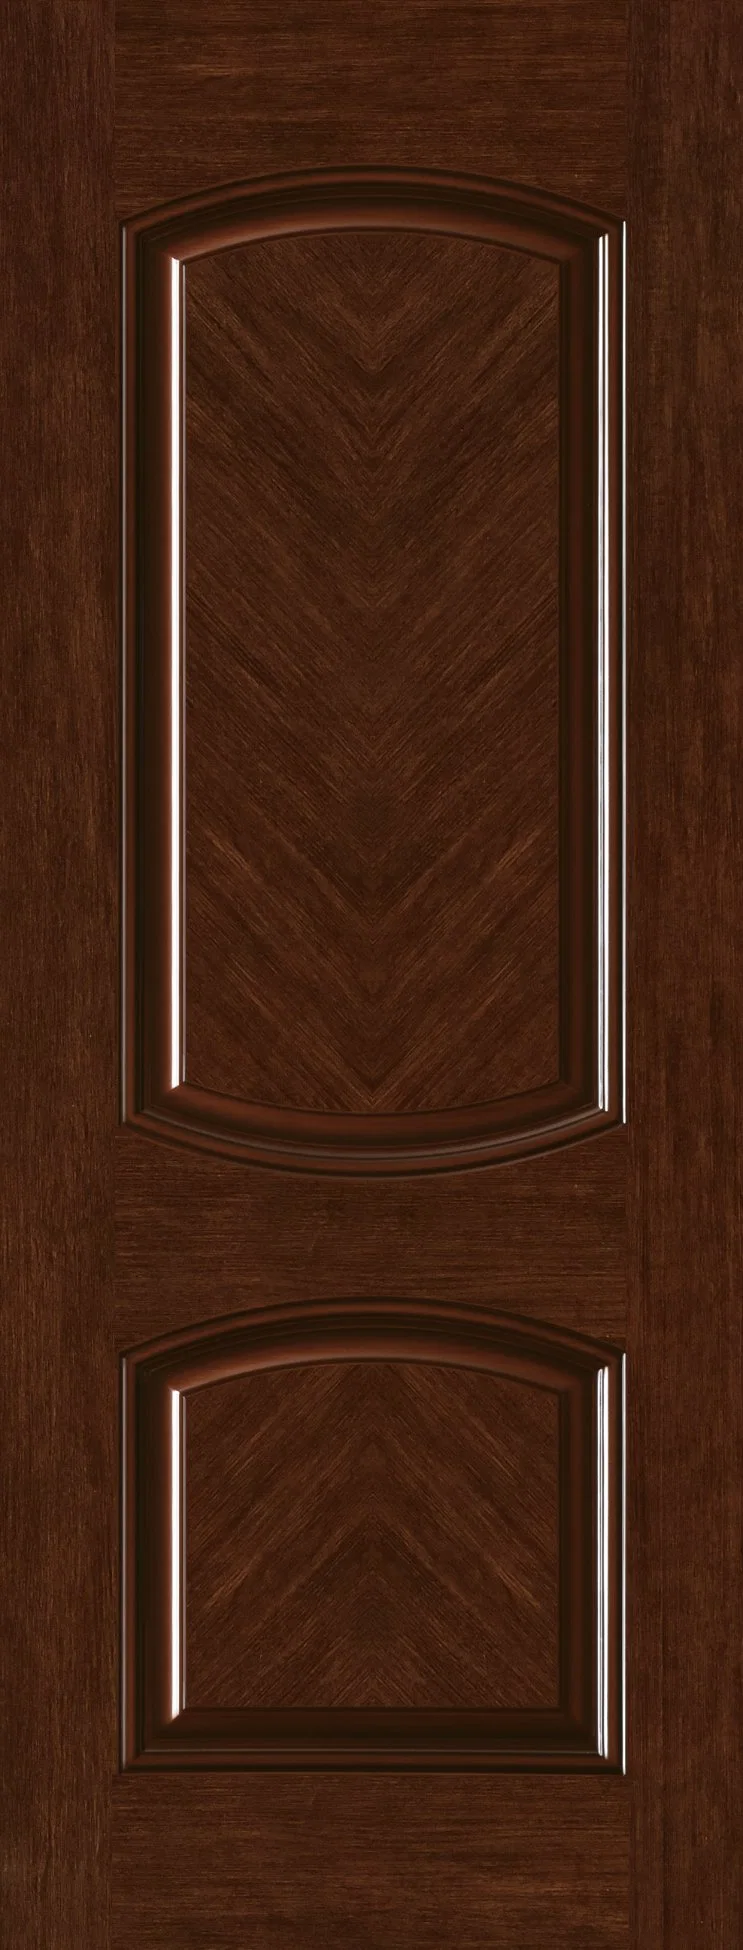 Factory Main Door Design Solid Wood Panel for Home Interior Decoration